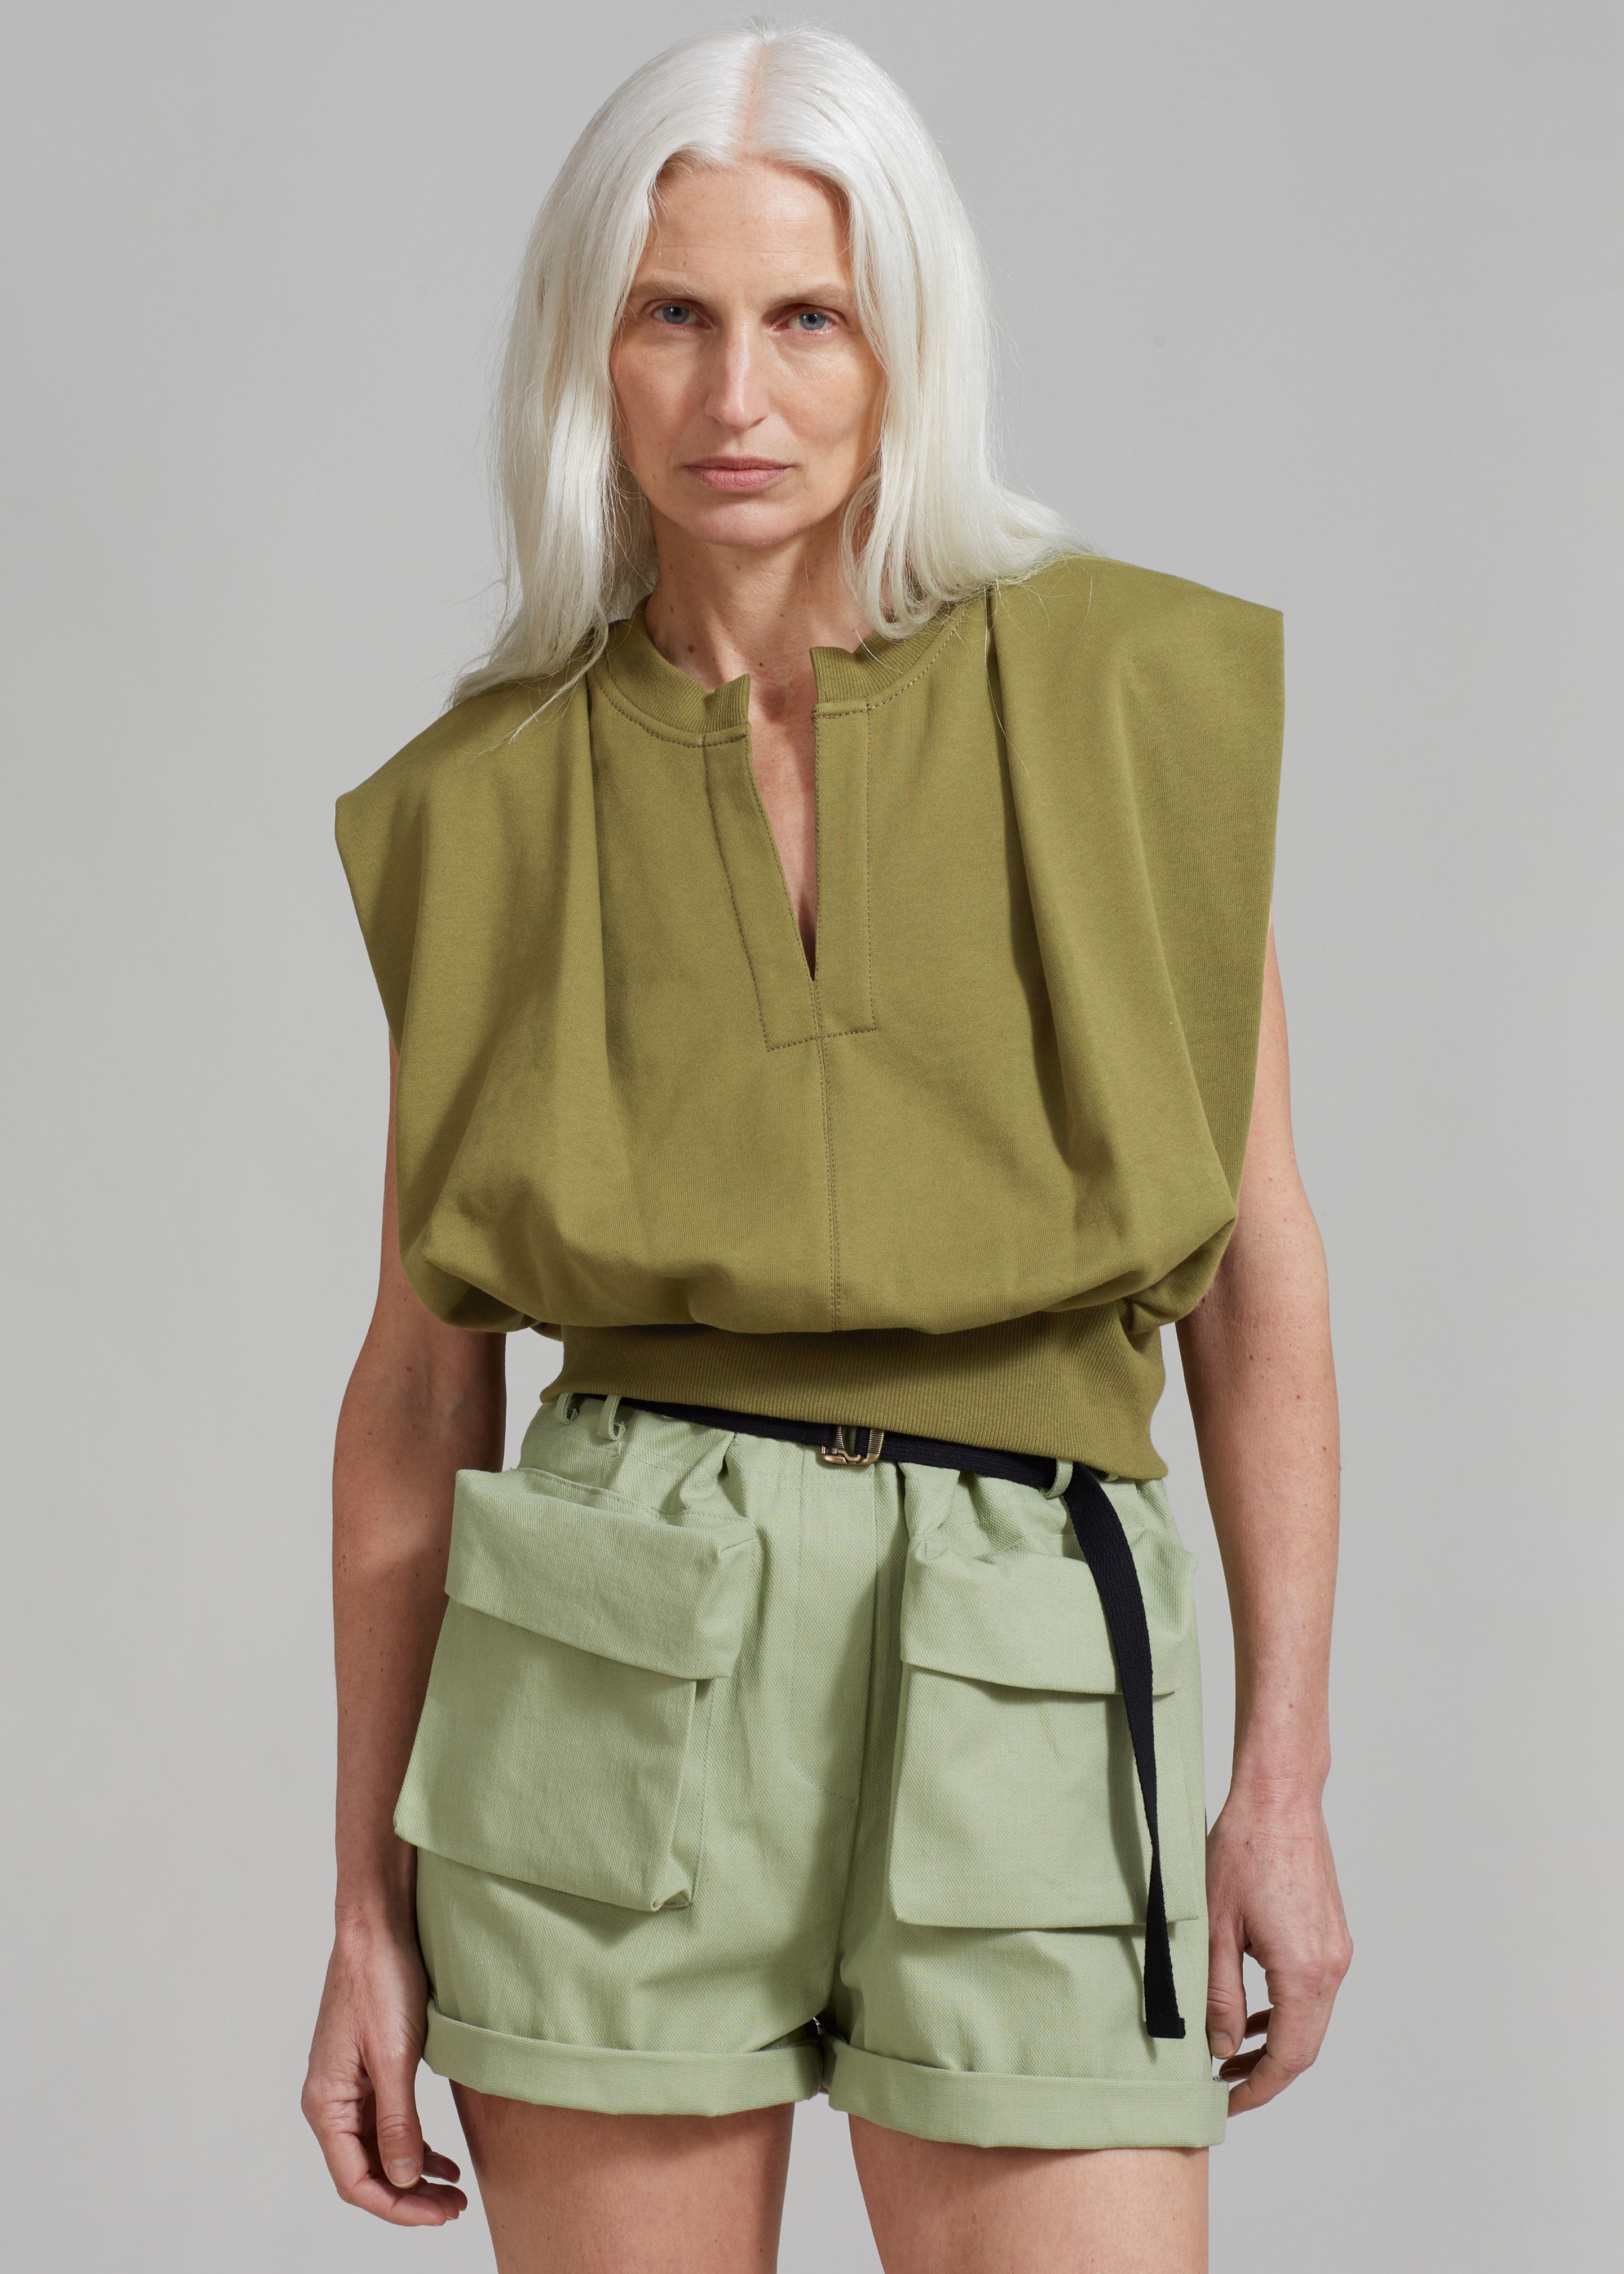 3.1 Phillip Lim Sleeveless French Terry Top - Olive – Frankie Shop 